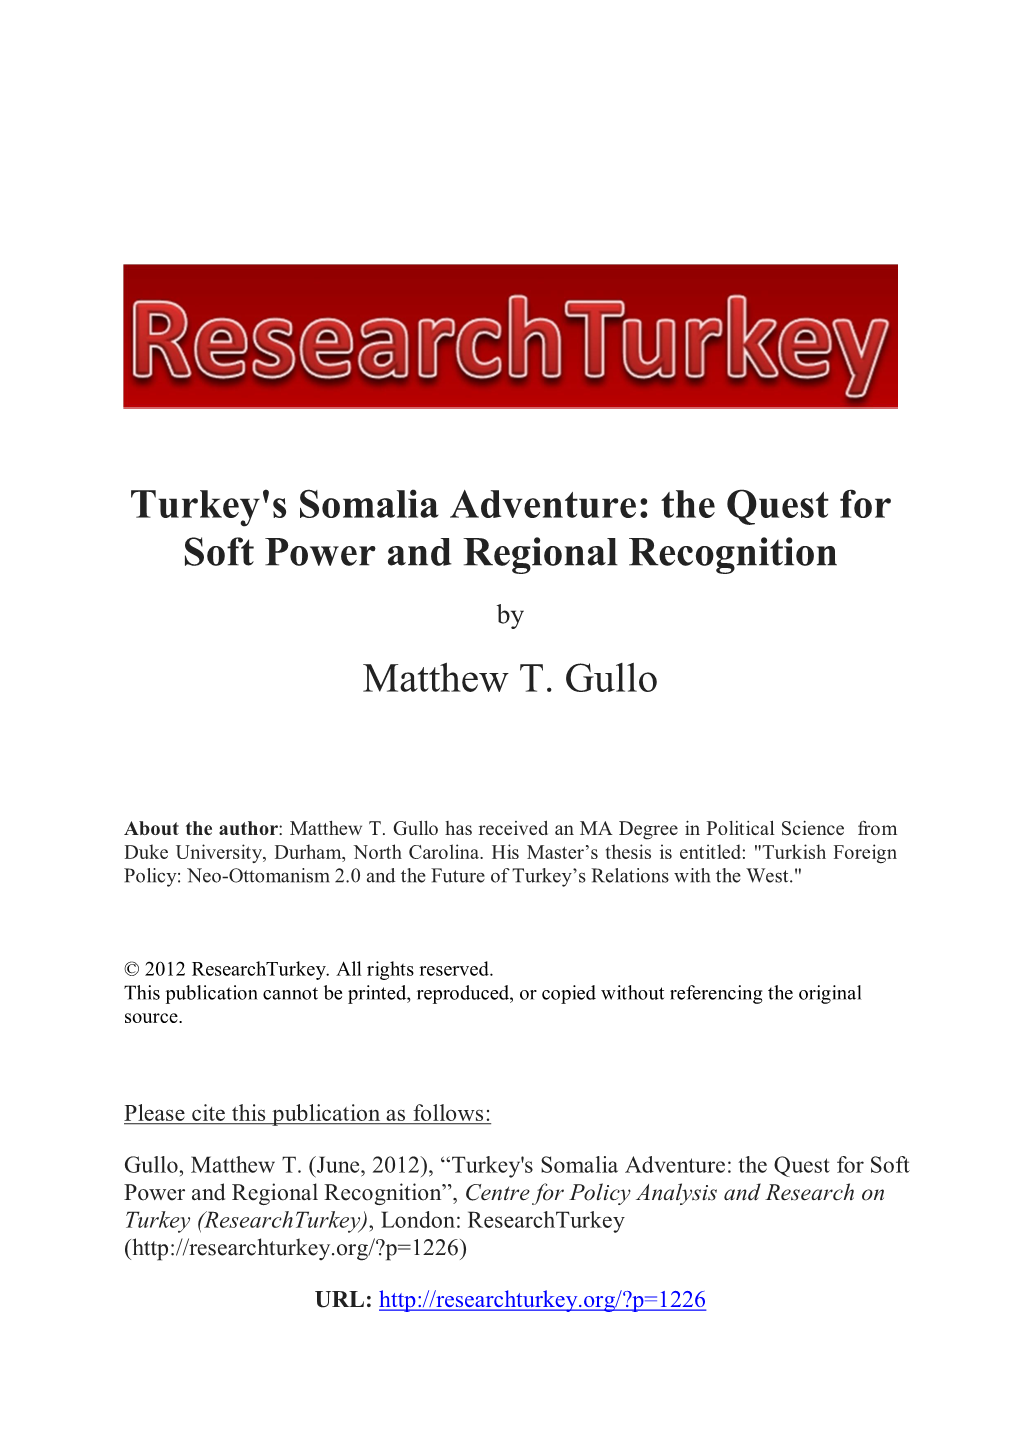 Turkey's Somalia Adventure: the Quest for Soft Power and Regional Recognition by Matthew T